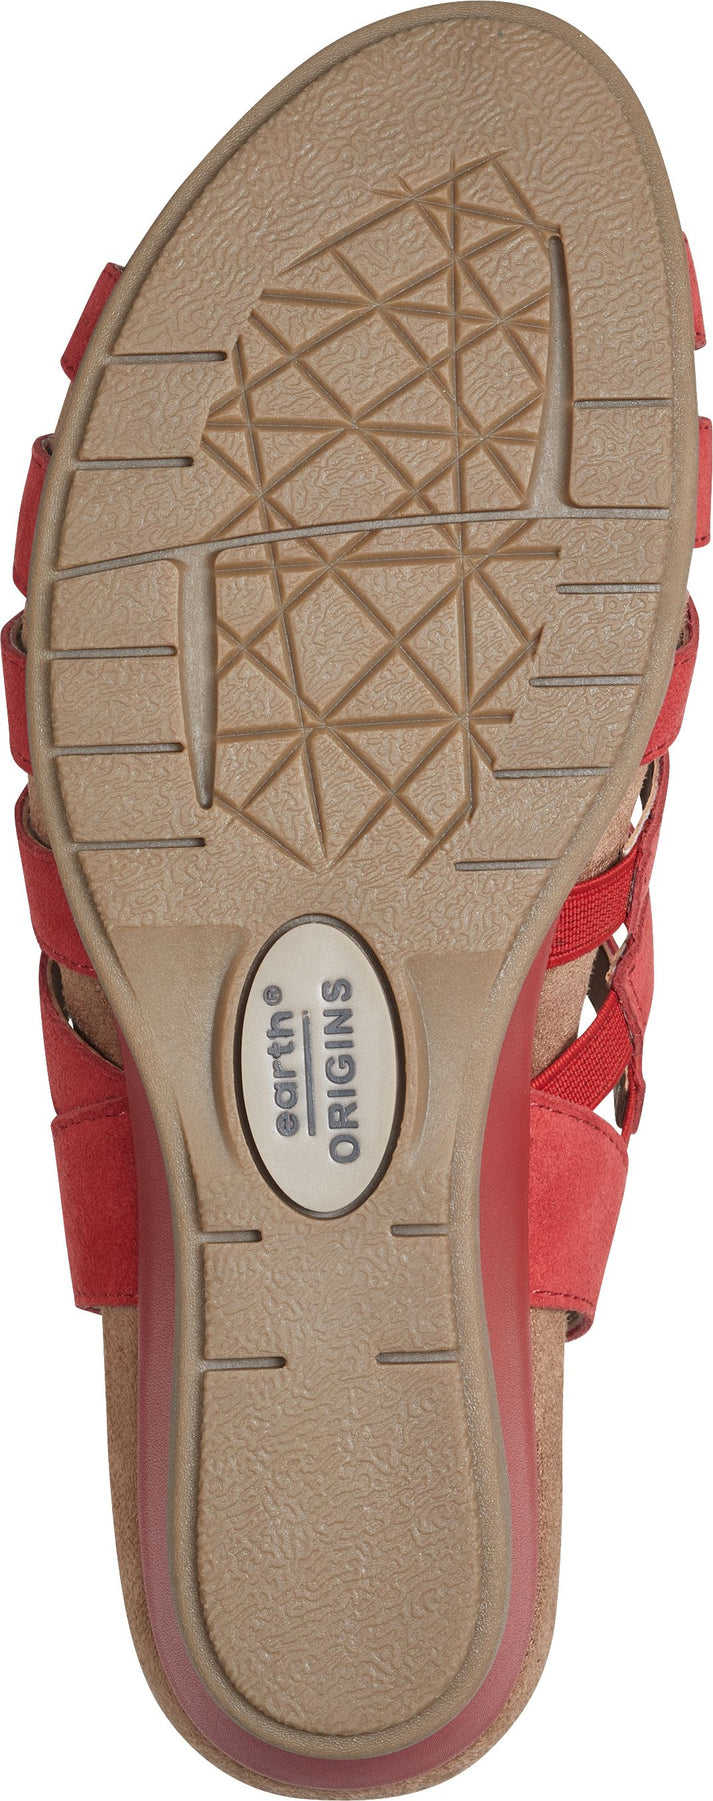 Earth Sandals Pico Pippa Spicy Red